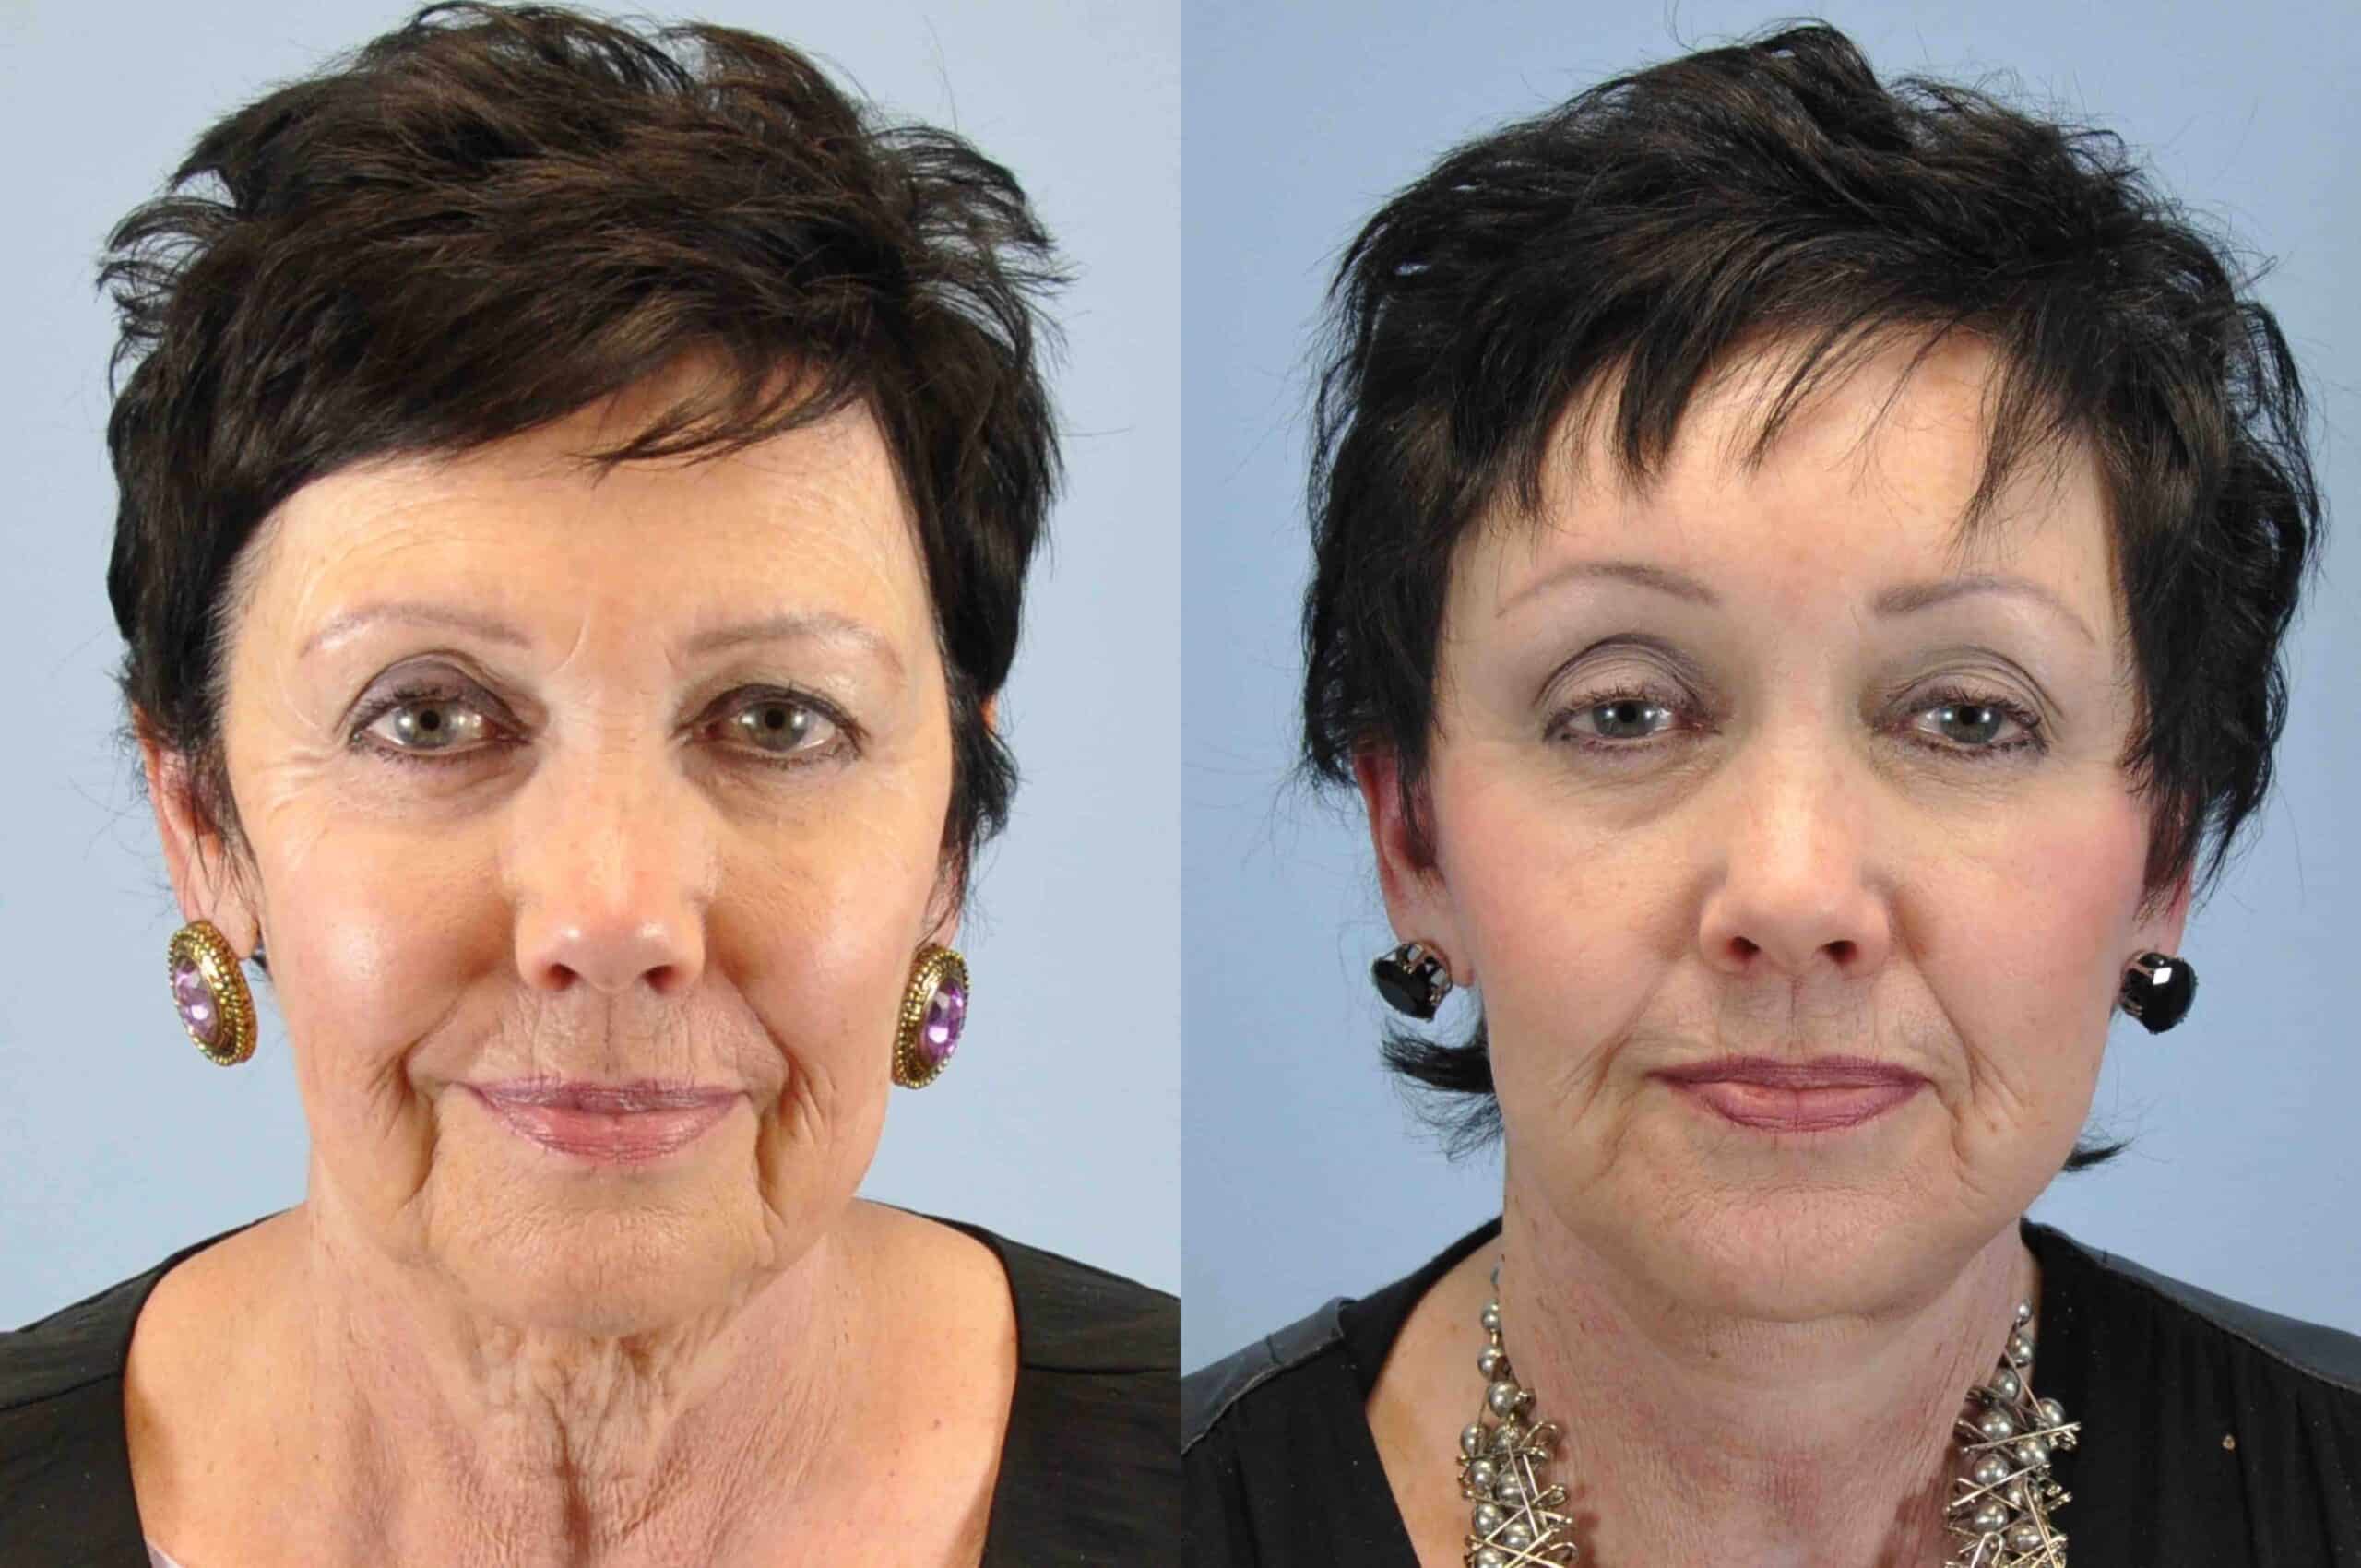 Before and after, patient 2 mo post op from Facelift, Neck Lift, Endobrow procedures performed by Dr. Paul Vanek